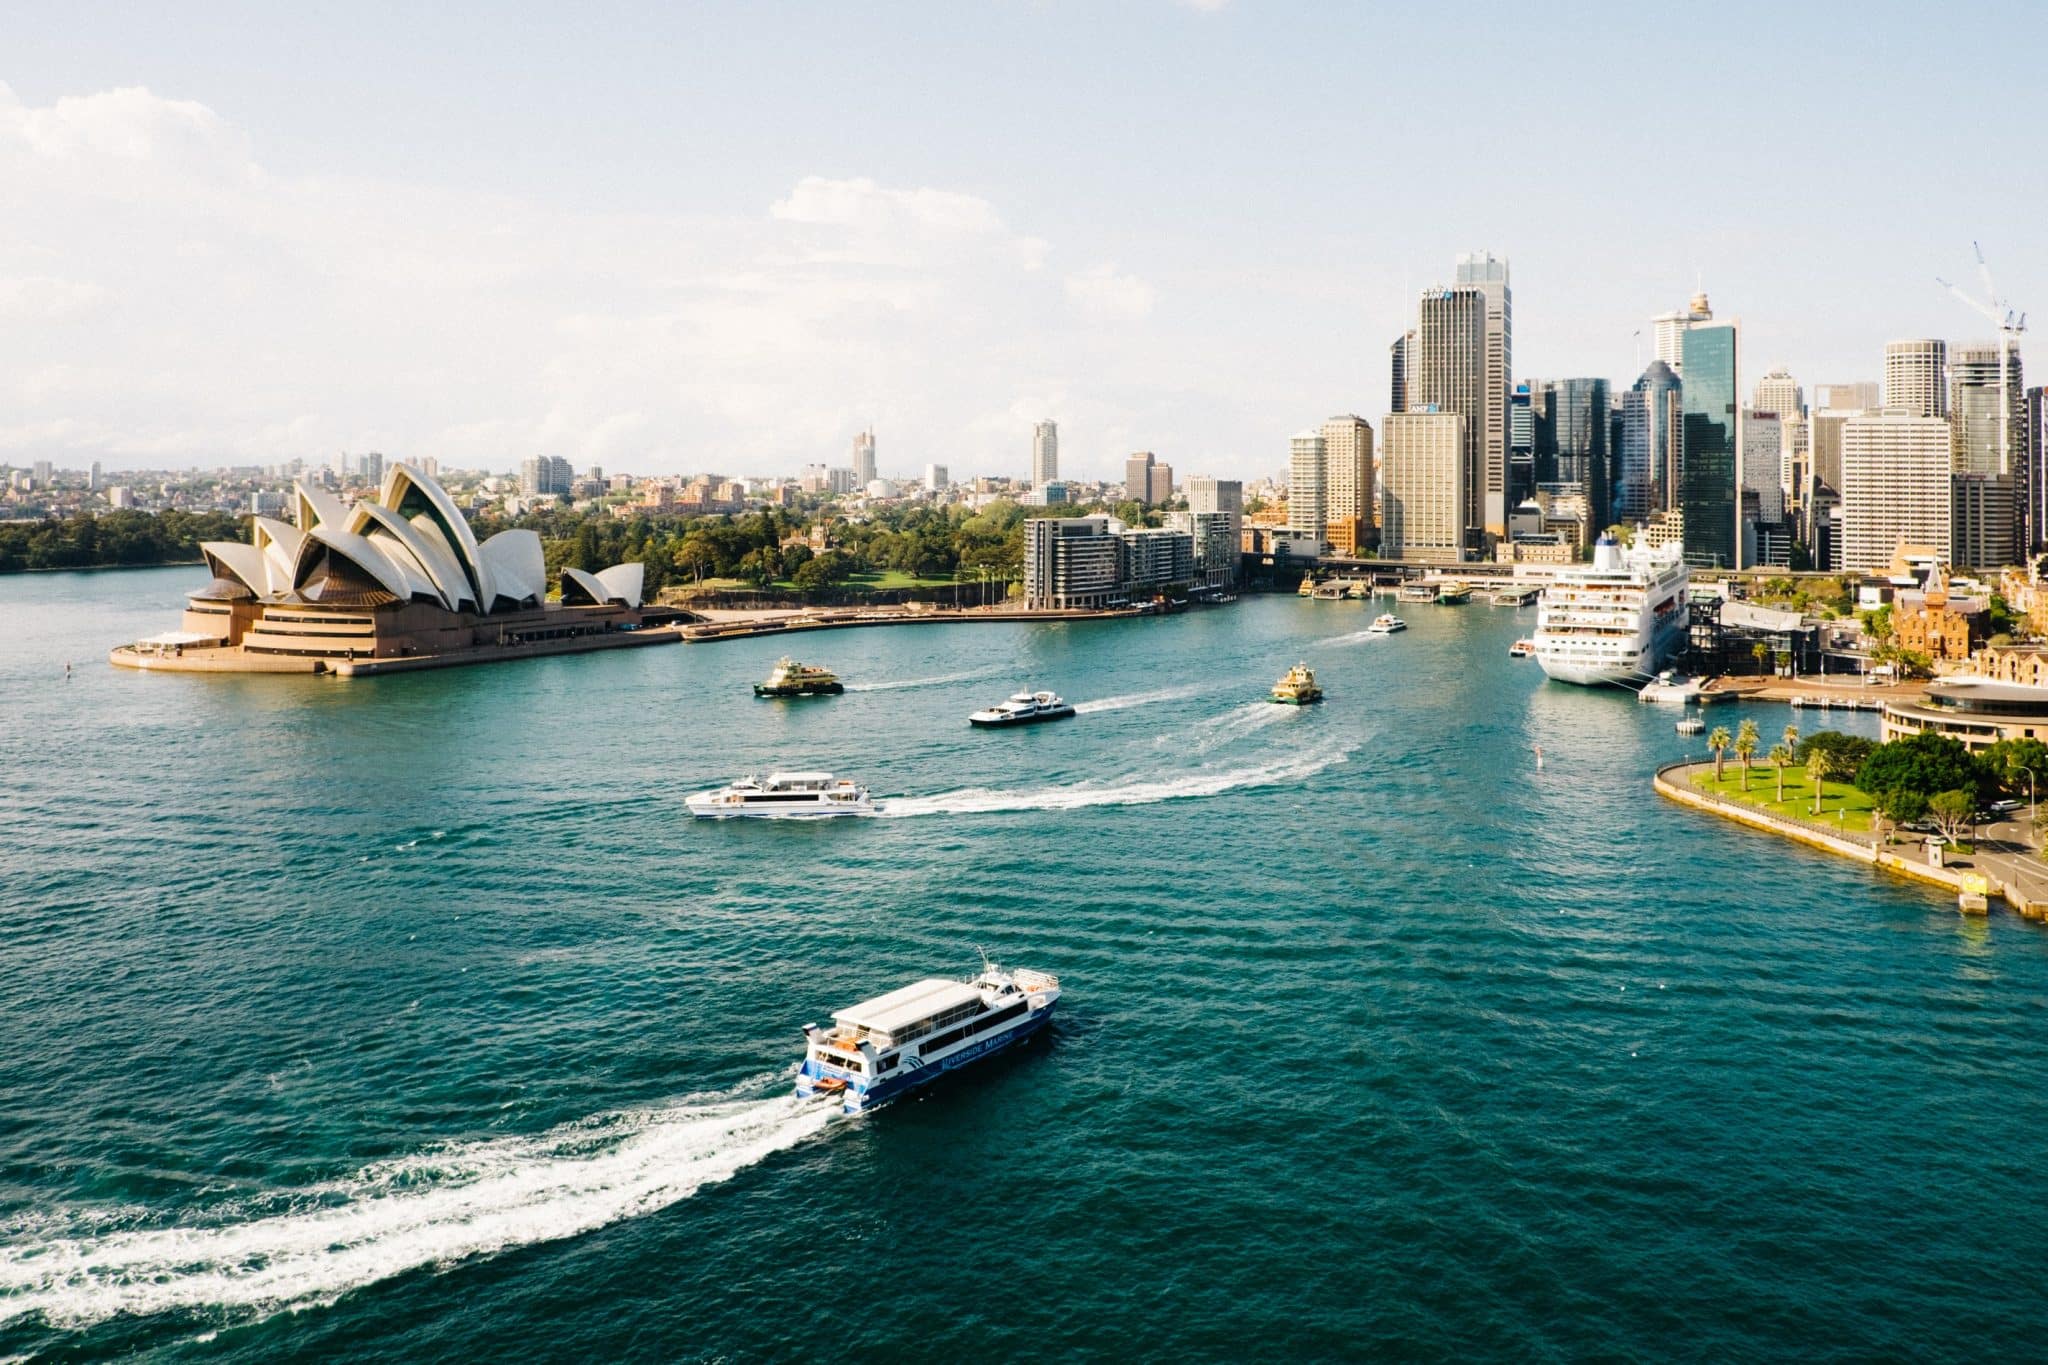 30 Underrated Attractions In Sydney To Inspire Your Next Visit!